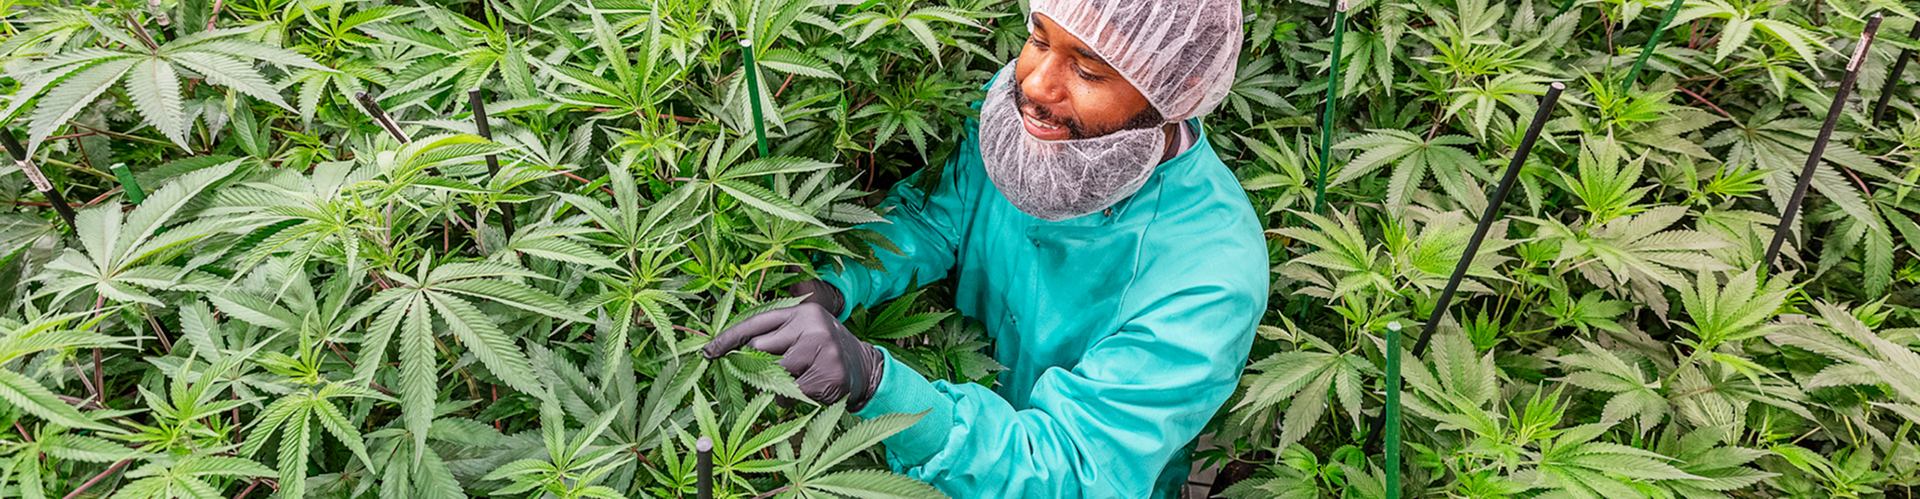 Individual Curaleaf employee, pointing at the lovely cannabis plant with great pride.